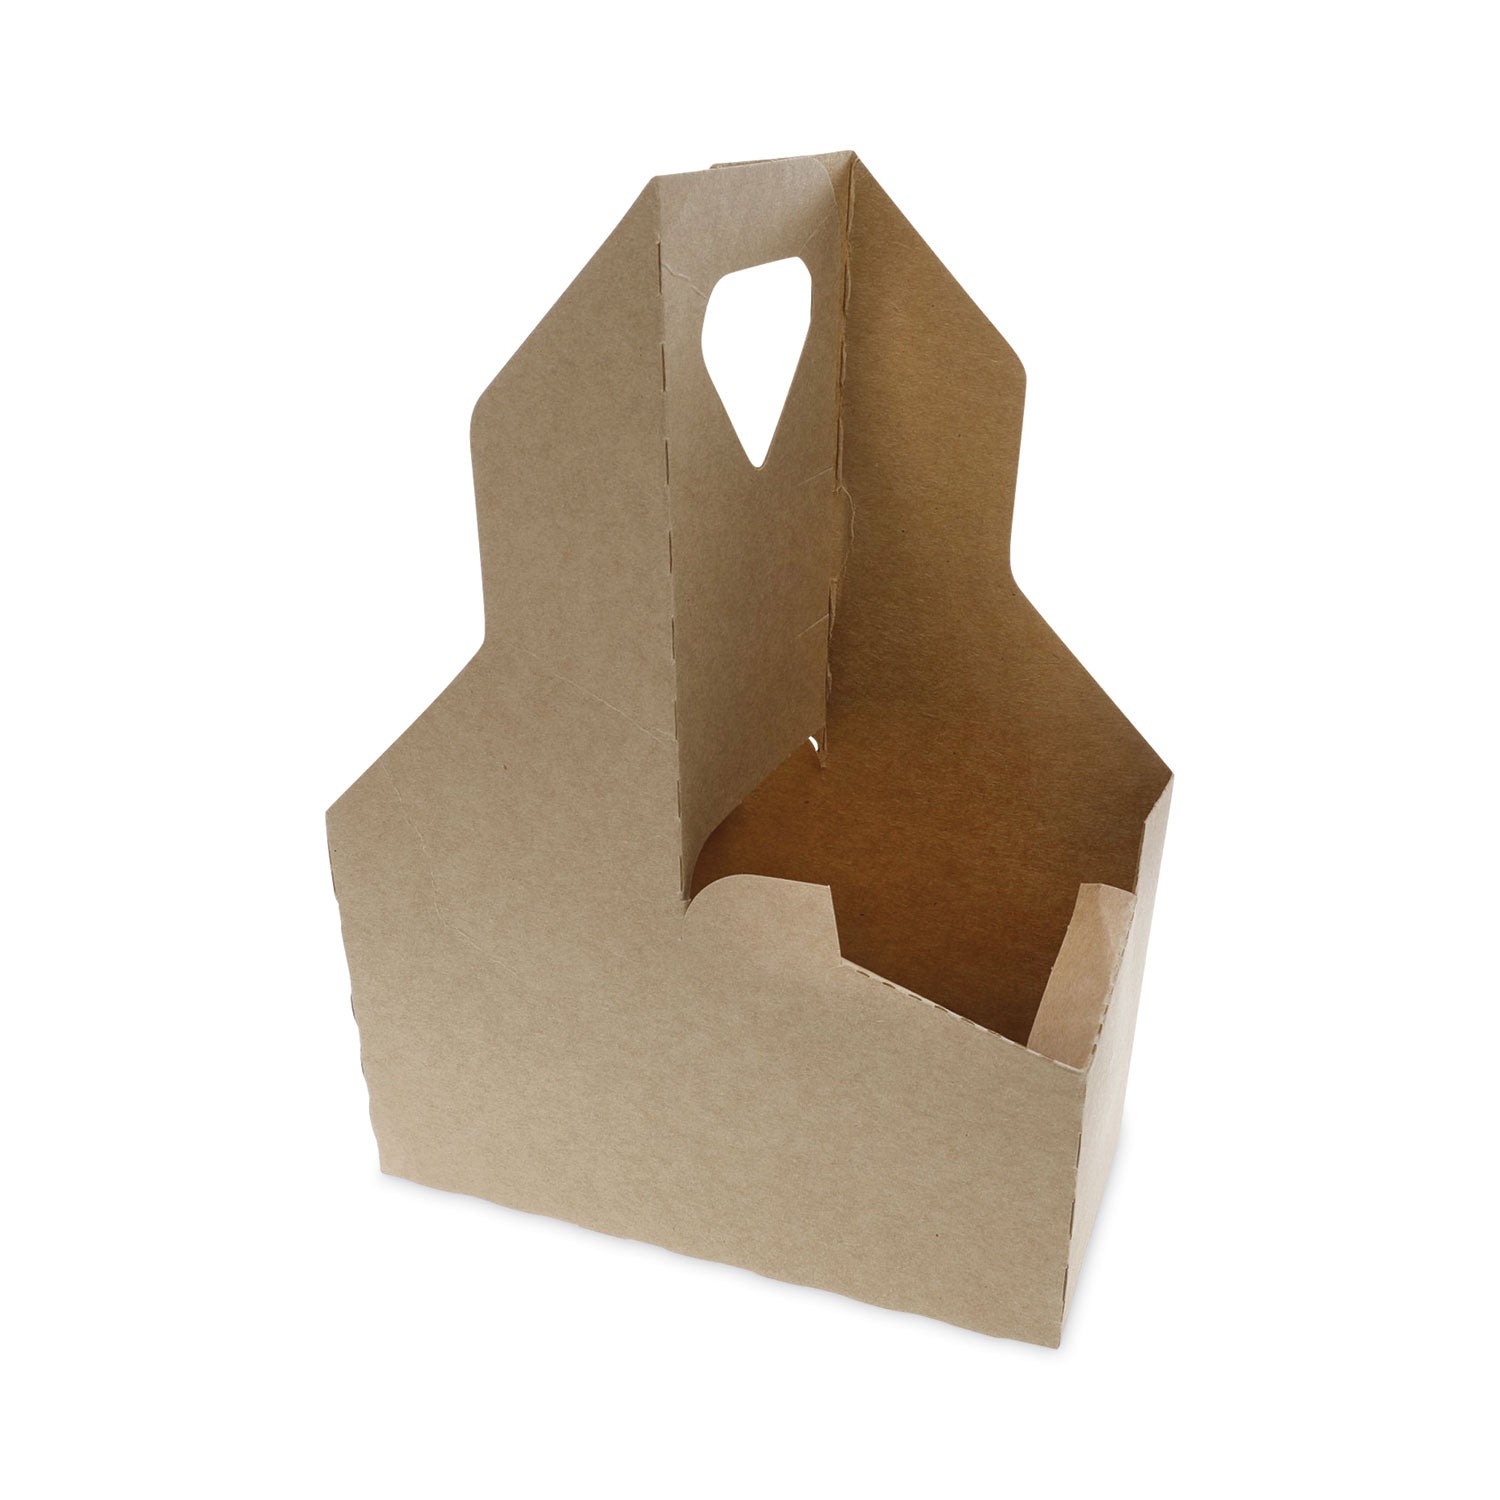 paperboard-cup-carrier-up-to-44-oz-two-to-four-cups-natural-250-carton_pctd24cpcry44 - 2